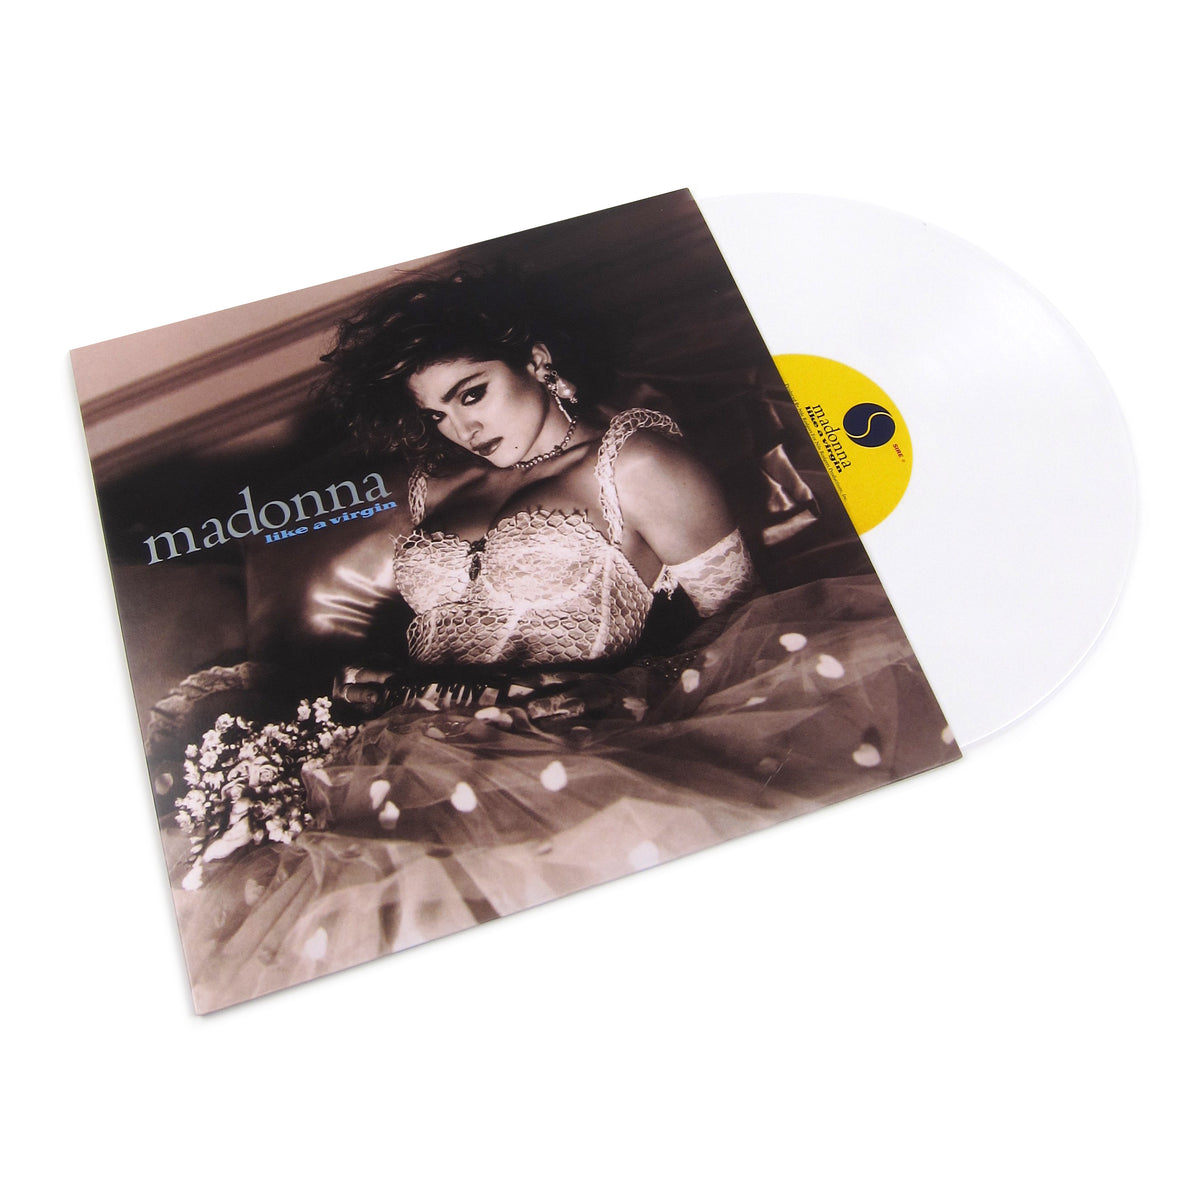 Erotica” and “Music” coloured vinyl reissues coming up - MadonnaTribe